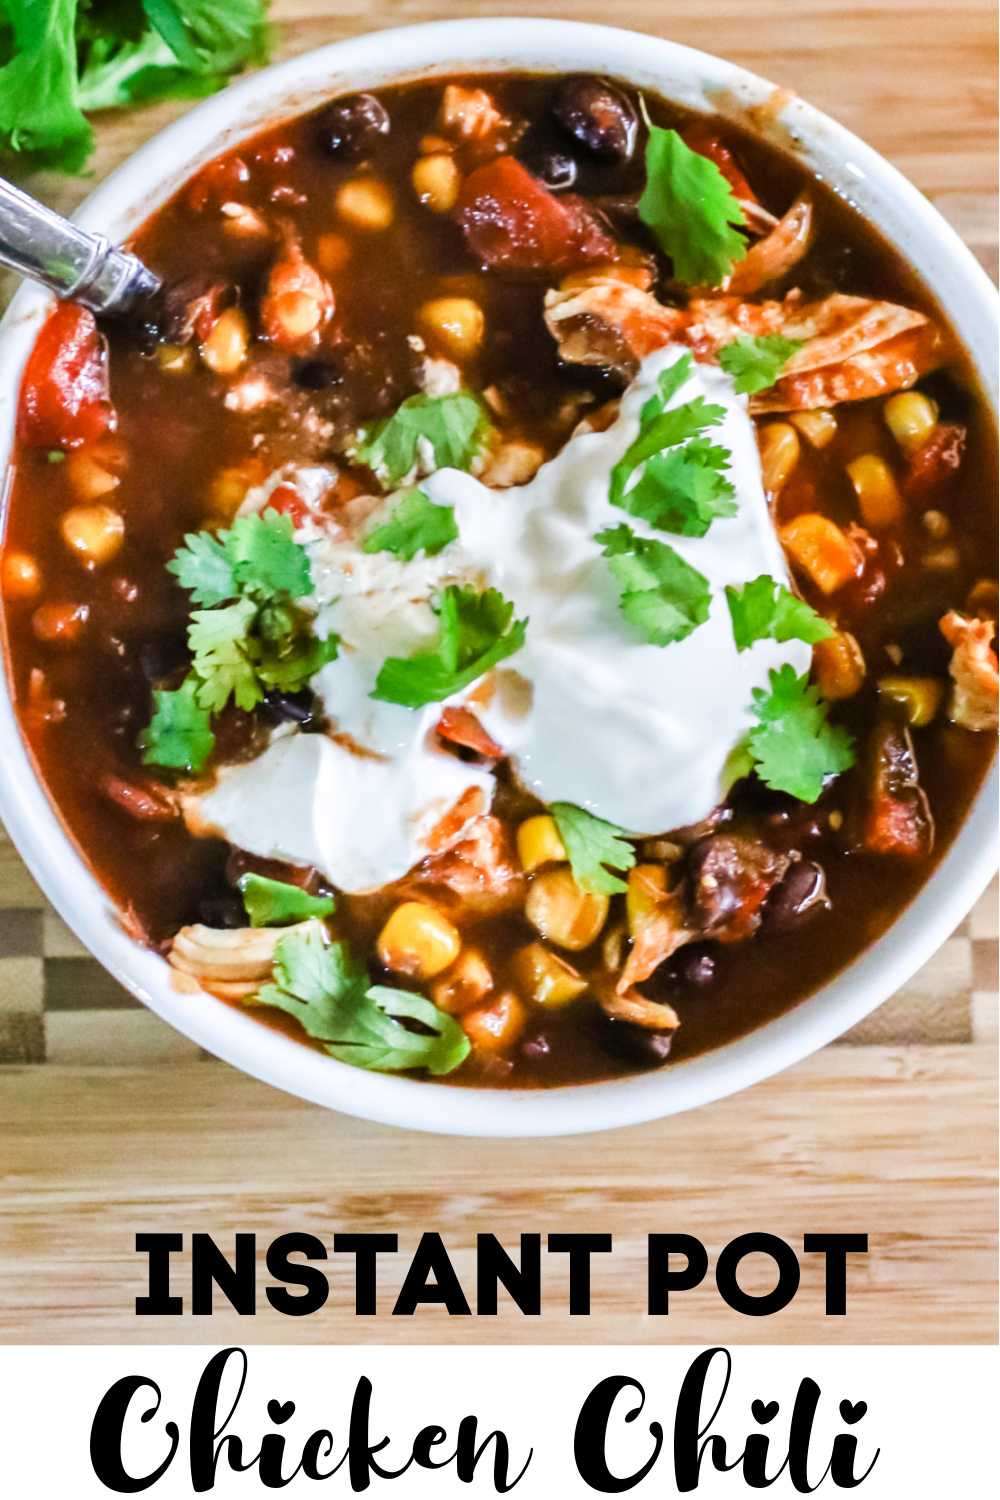 Instant Pot Chicken Chili is a hearty meal that's finished in less than 30 minutes. Made with shredded chicken, loaded with vegetables, and then flavored with the perfect blend of seasonings. It's a quick and easy dinner recipe the whole family will enjoy.